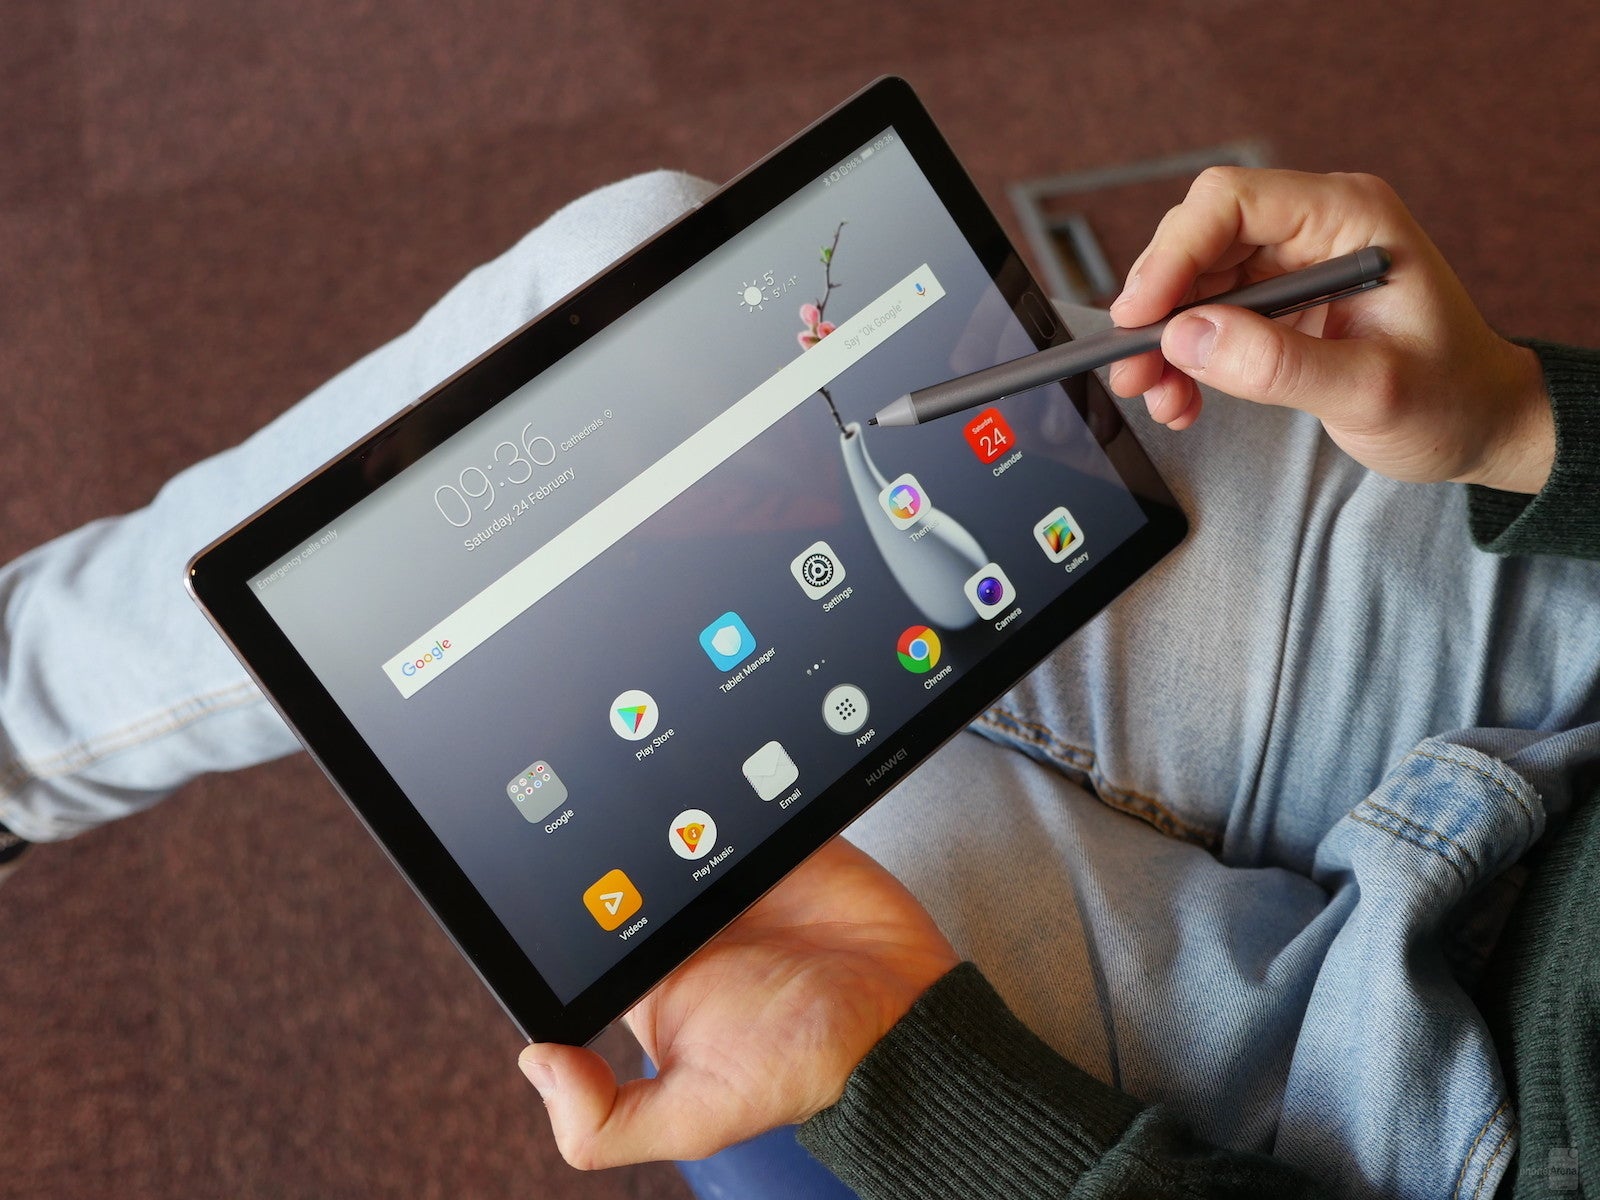 Huawei MediaPad M5 and M5 Pro Hands-On: Android tablets on the